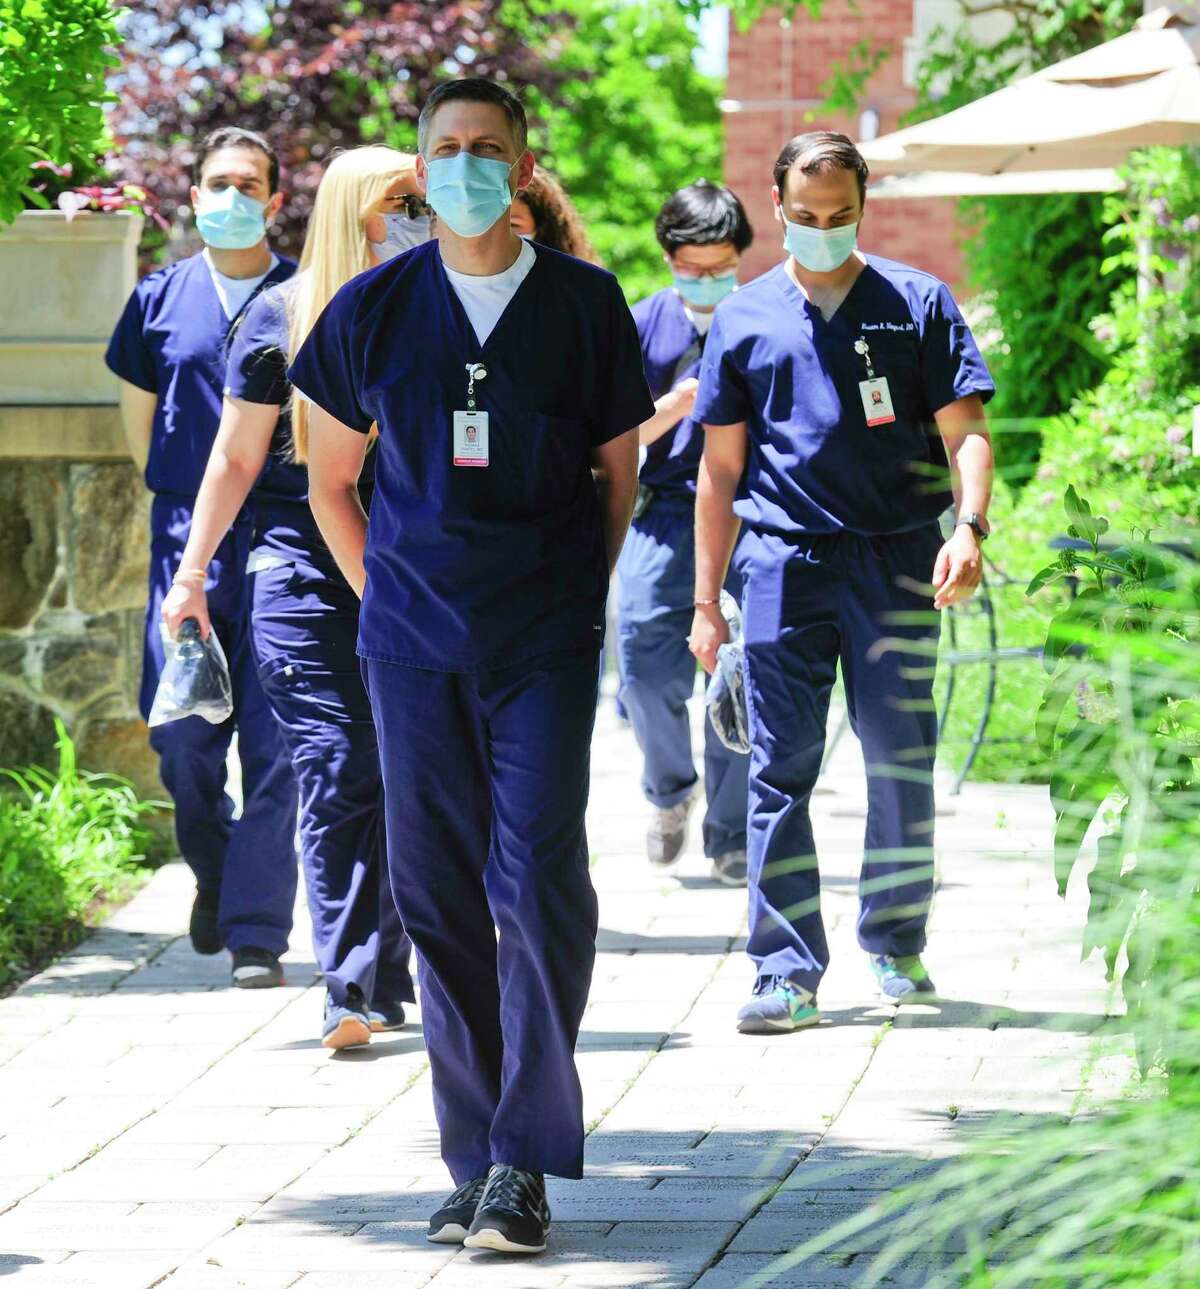 Doctors of Greenwich Hospital Internal Medicine Residency Program walk to the gardens for a post graduation photo on June 12, 2020 in Greenwich, Connecticut. This is a group of doctors were pressed into service as rookies to help treat COVID patients in the ICU and for bedside care.